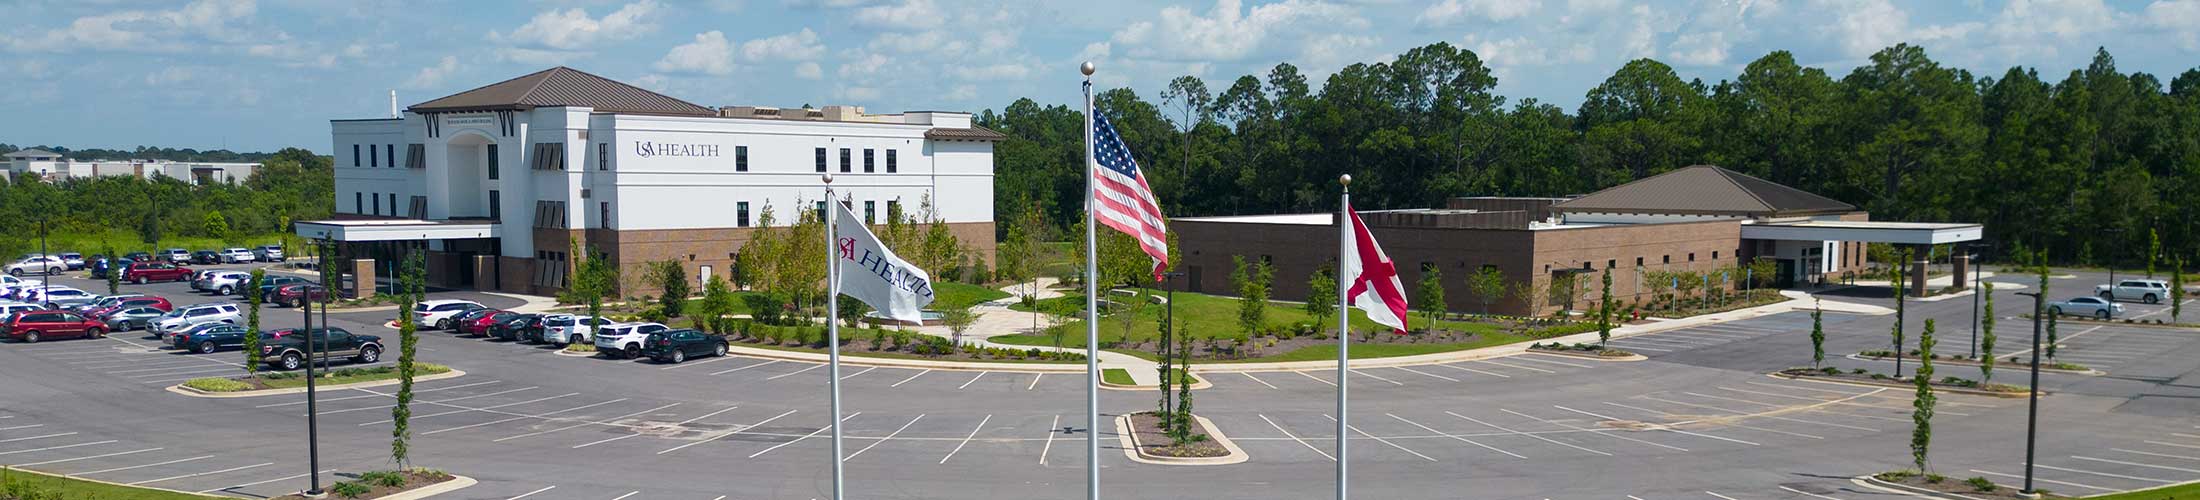 ý Health facility with flags in front.